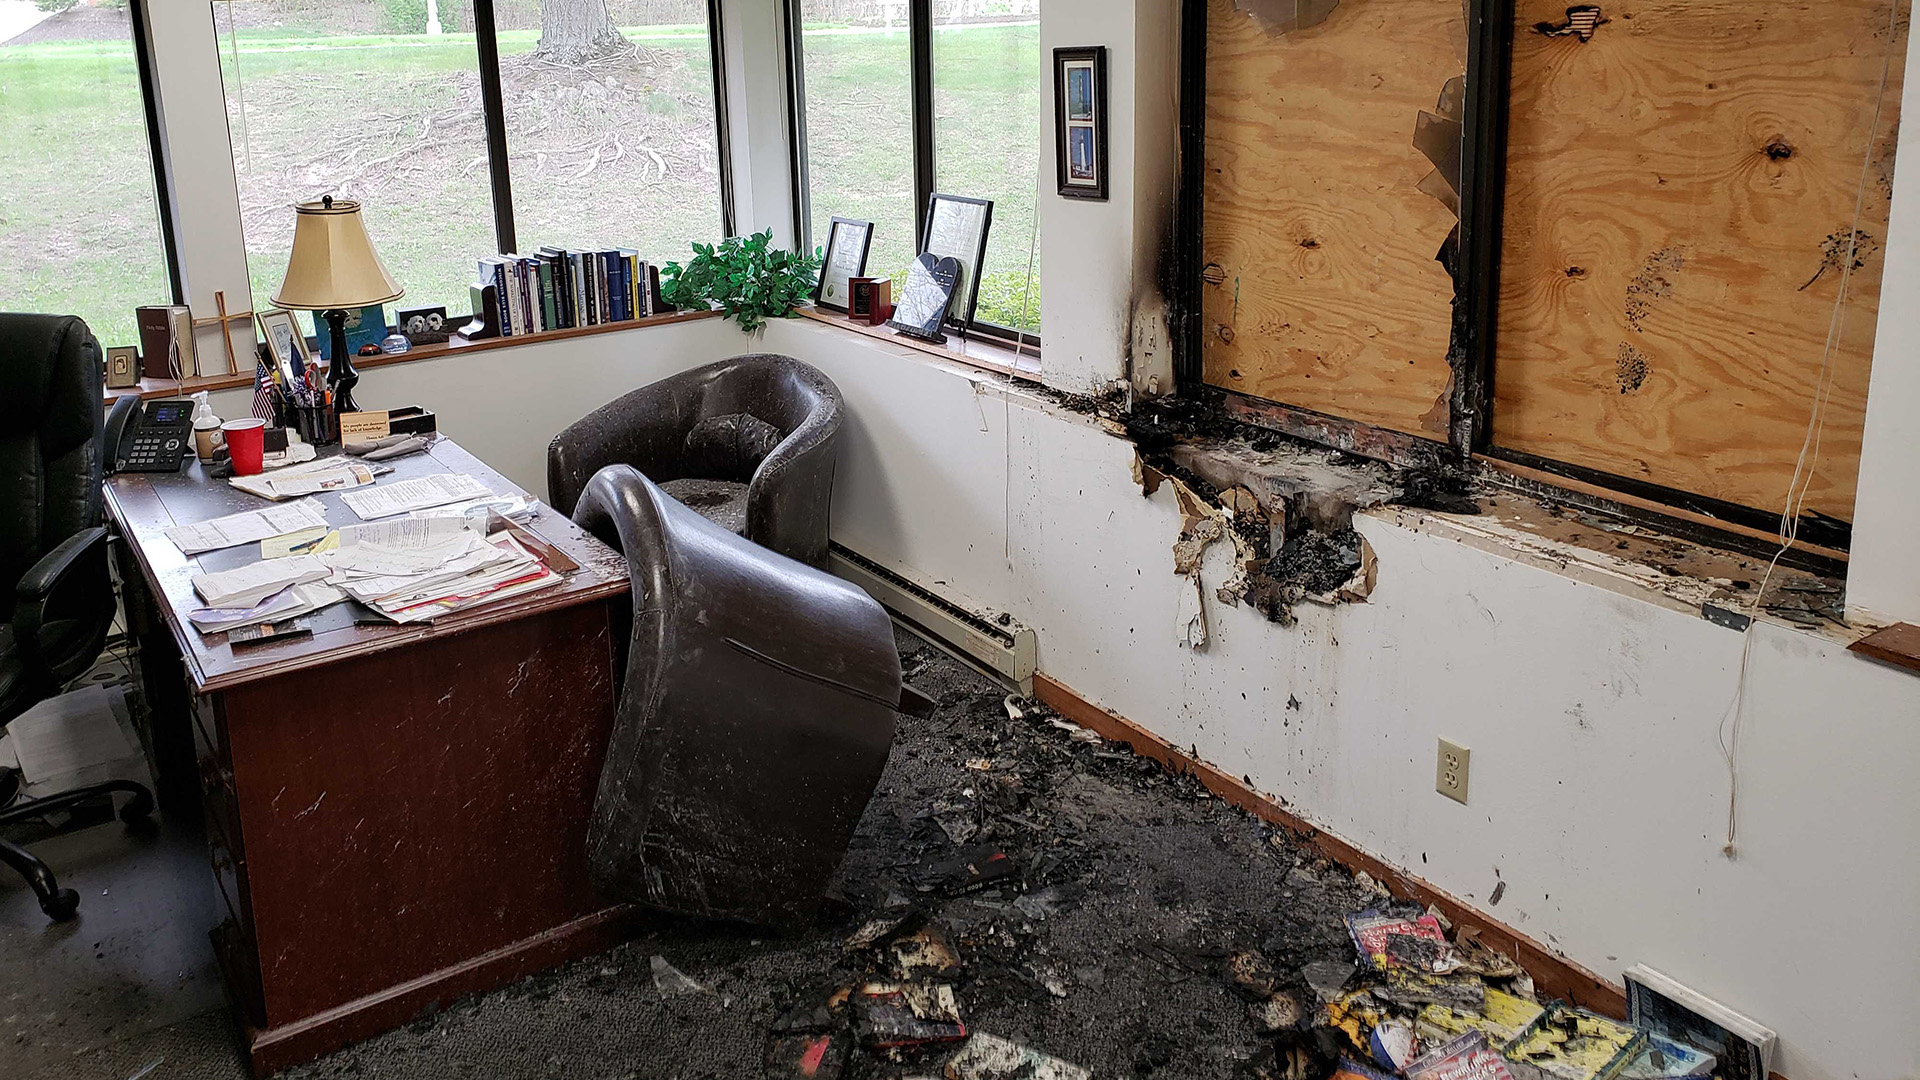 In an office with a desk, multiple chairs and other objects, burned materials and other detritus cover a floor beneath a window frame covered by plywood and surrounded by scorch marks.